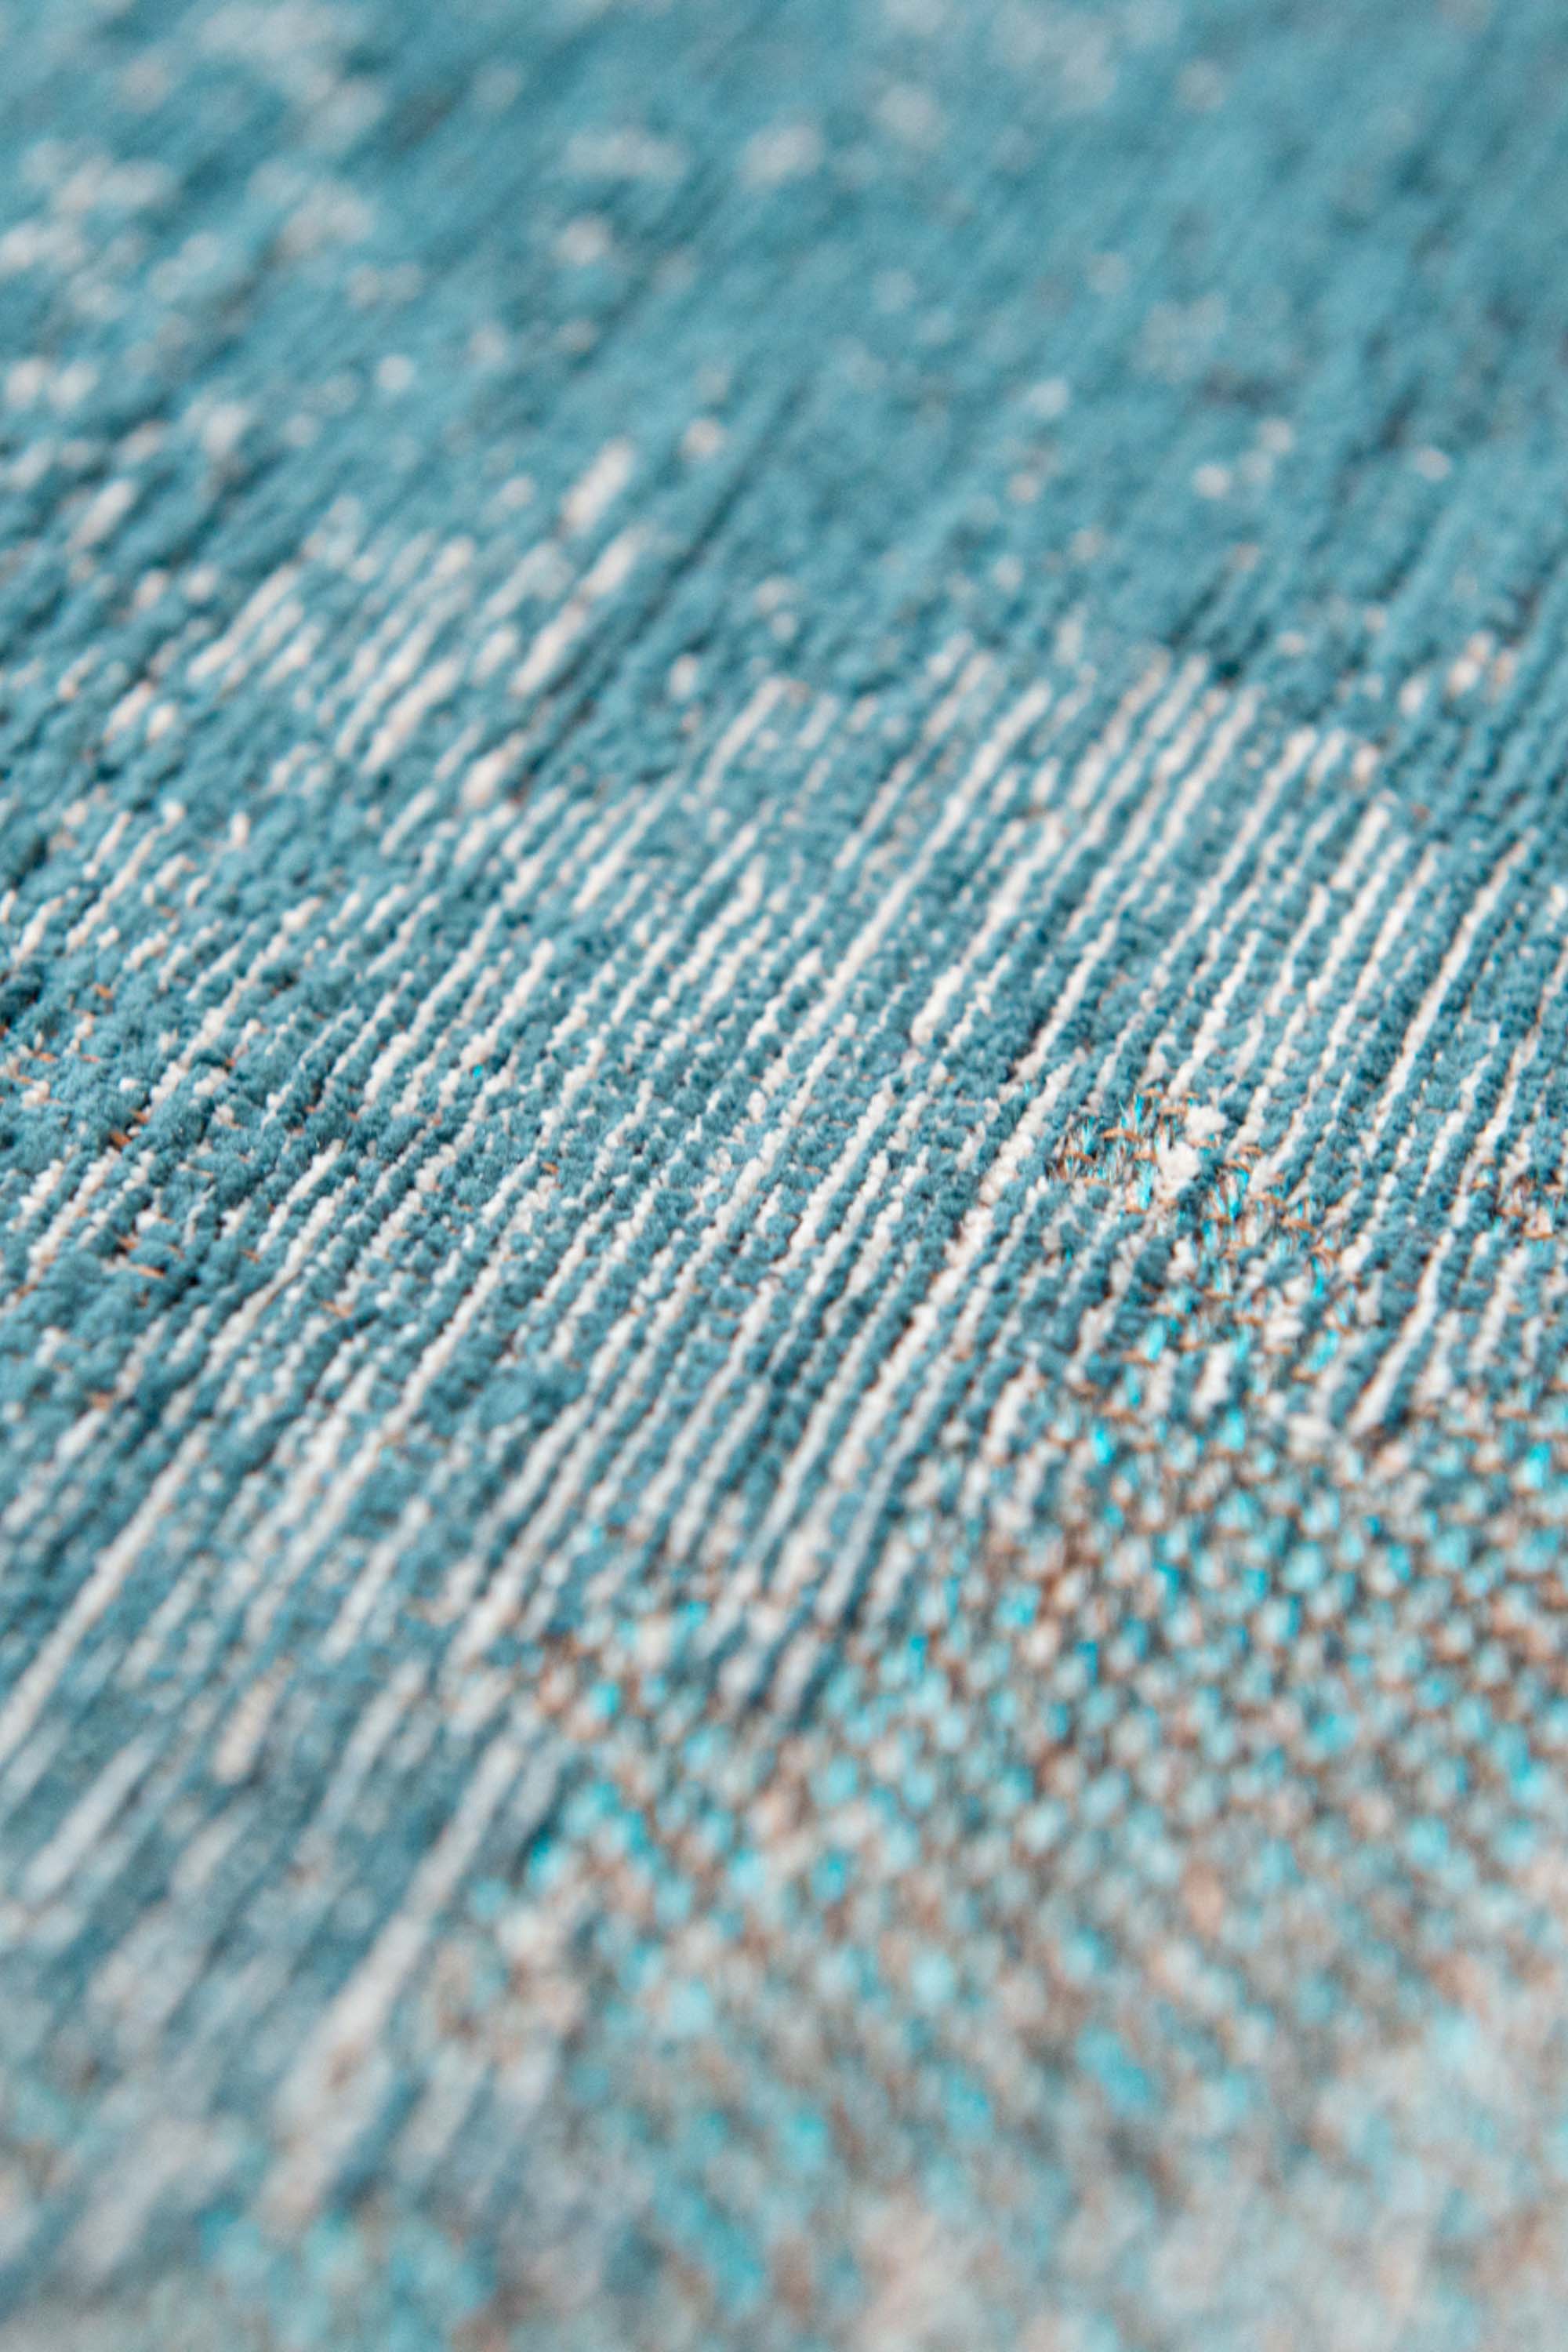 Modern rug with blue abstract shoreline pattern